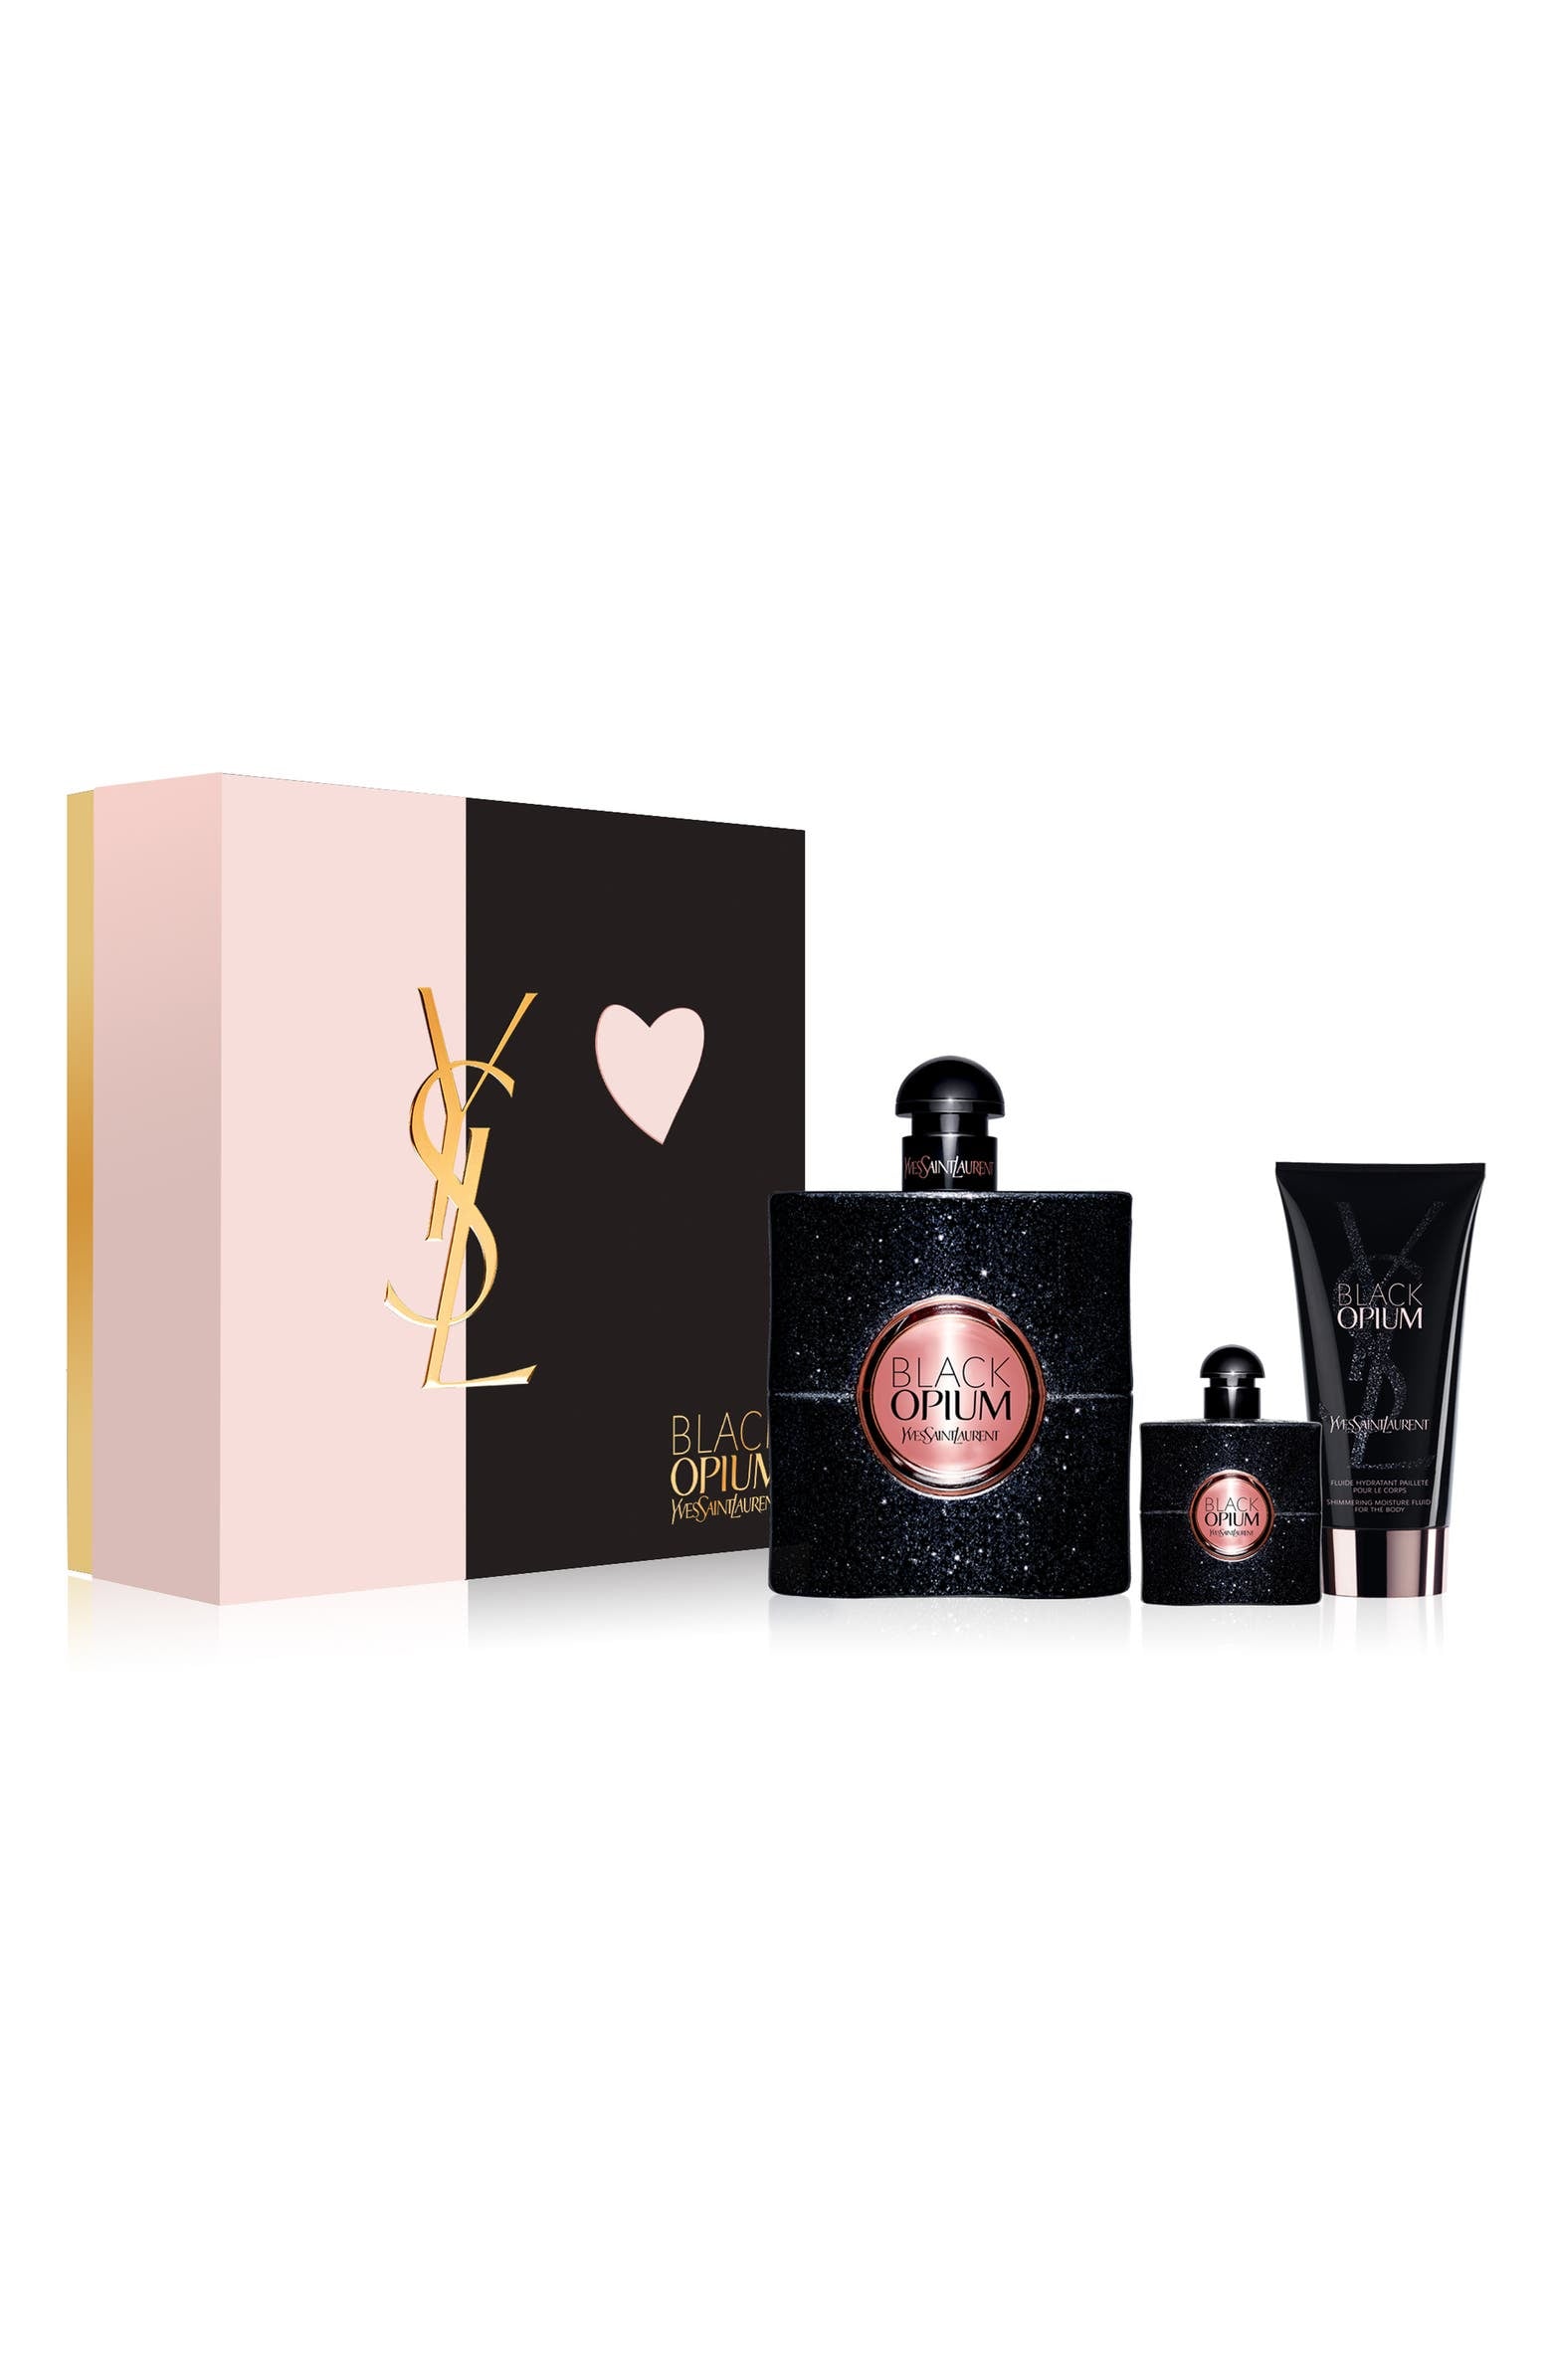 Score the Best Deal: Cheapest Place for Black Opium Perfume